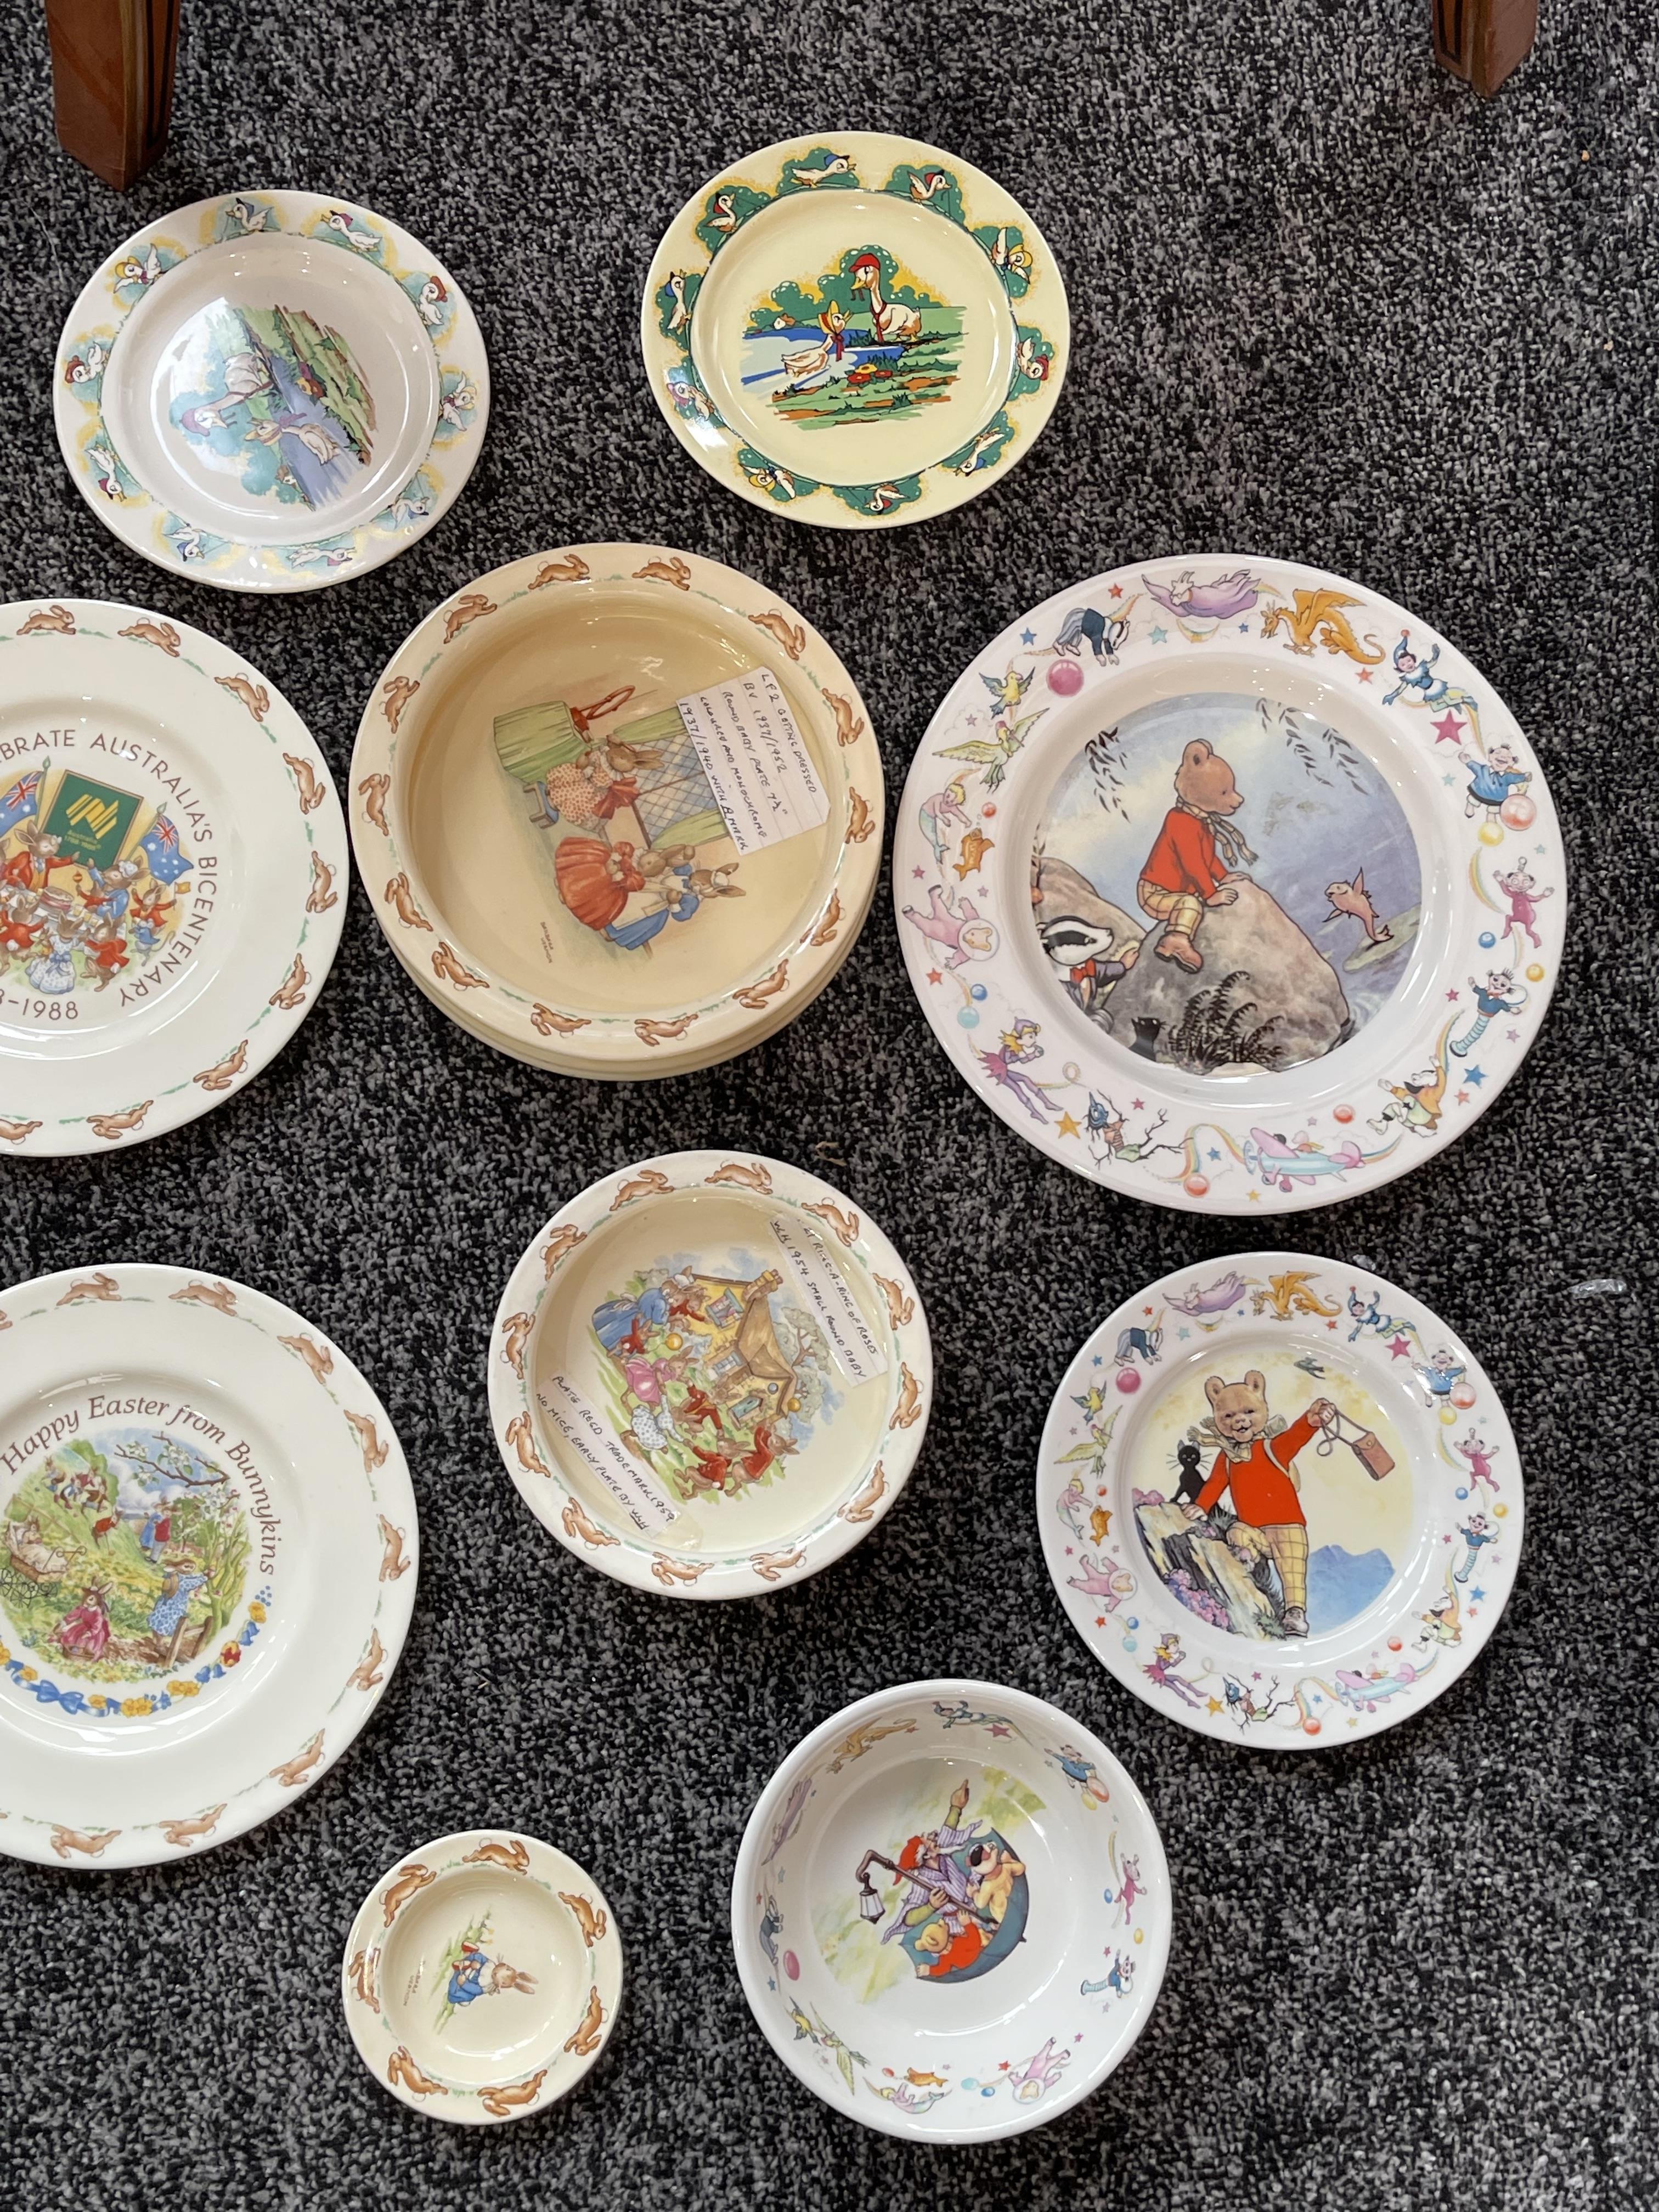 Quantity of Royal Doulton - Bunnykins and Wedgewoo - Image 2 of 9